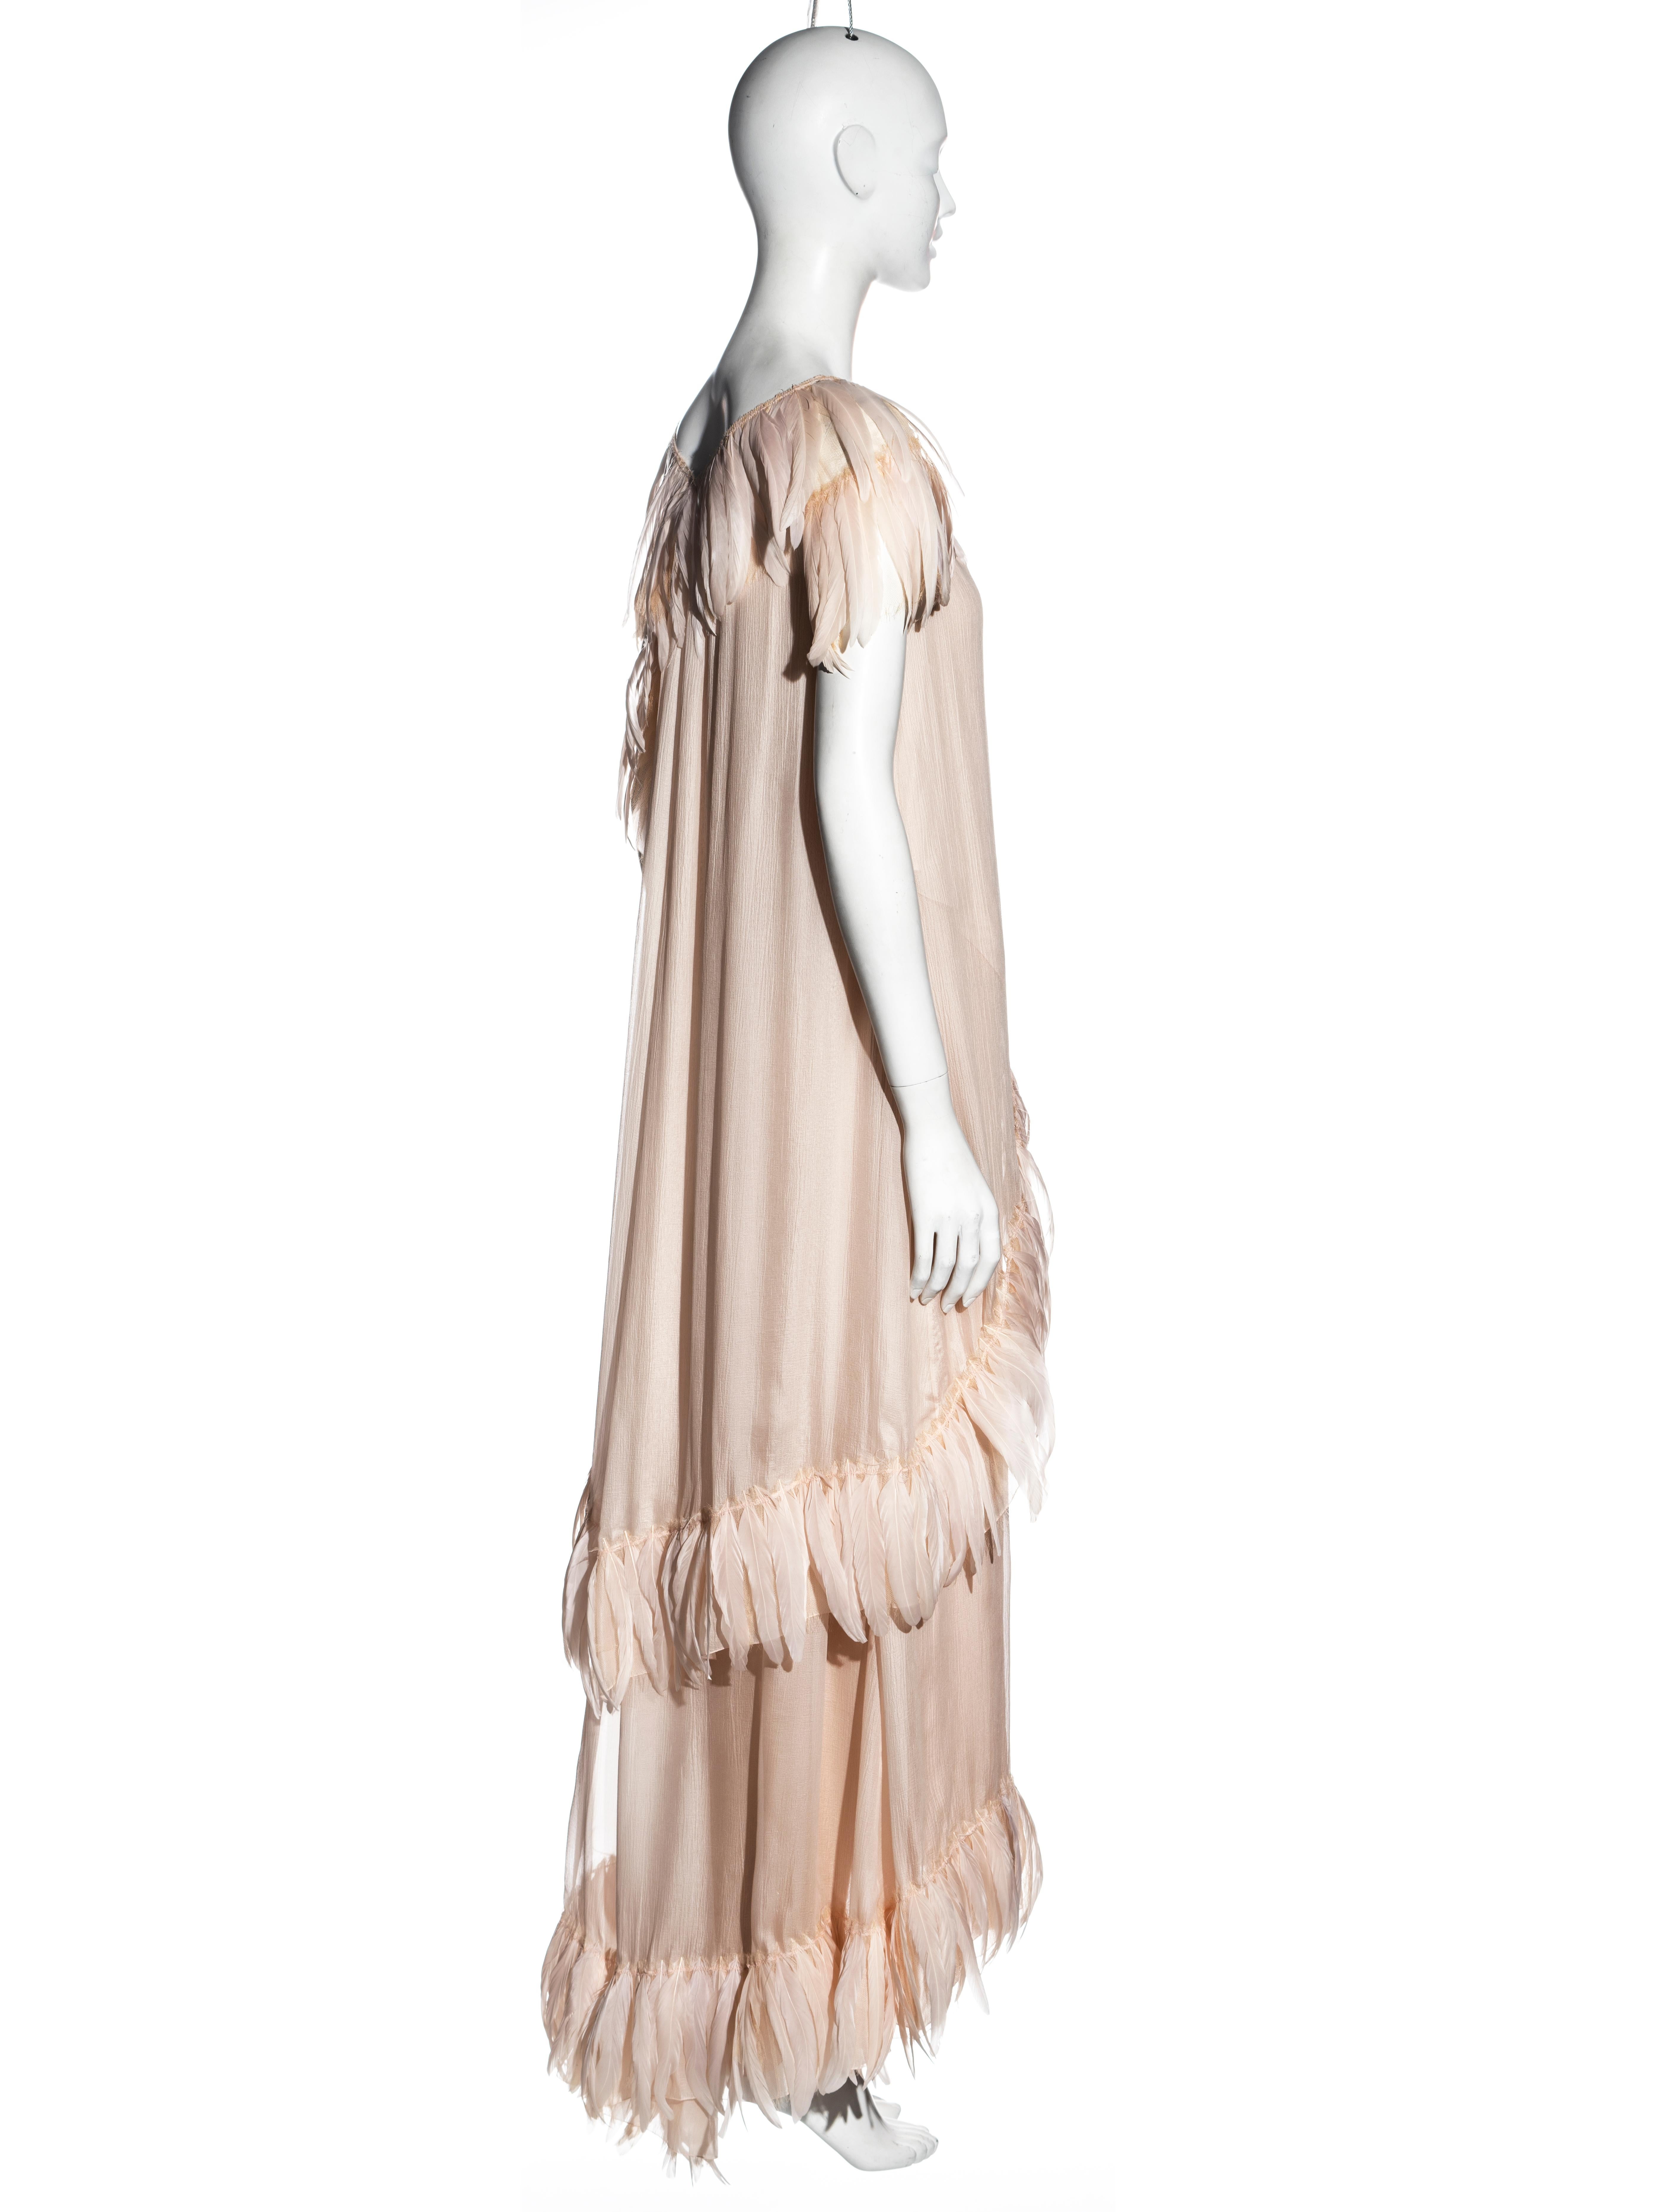 Chanel by Karl Lagerfeld silk chiffon evening dress with feathers, cr 2009 1